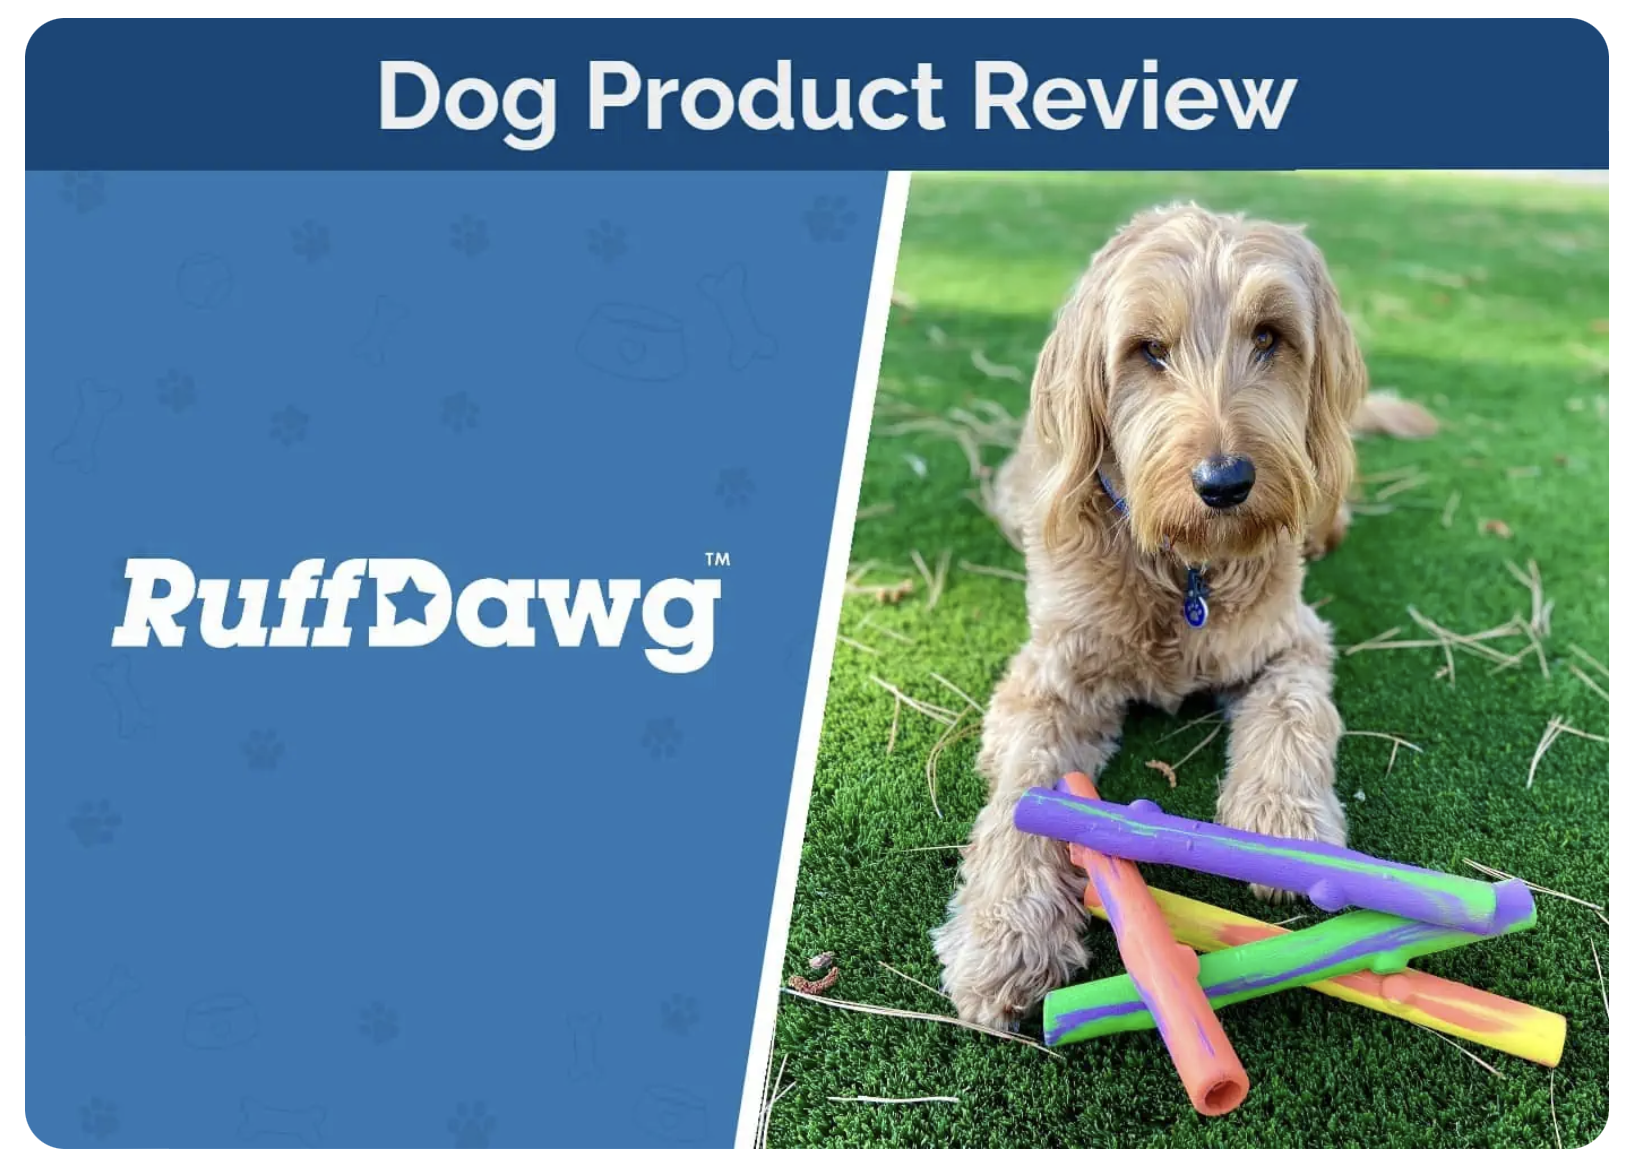 Ruff Dawg Toy Review by Petkeen.com